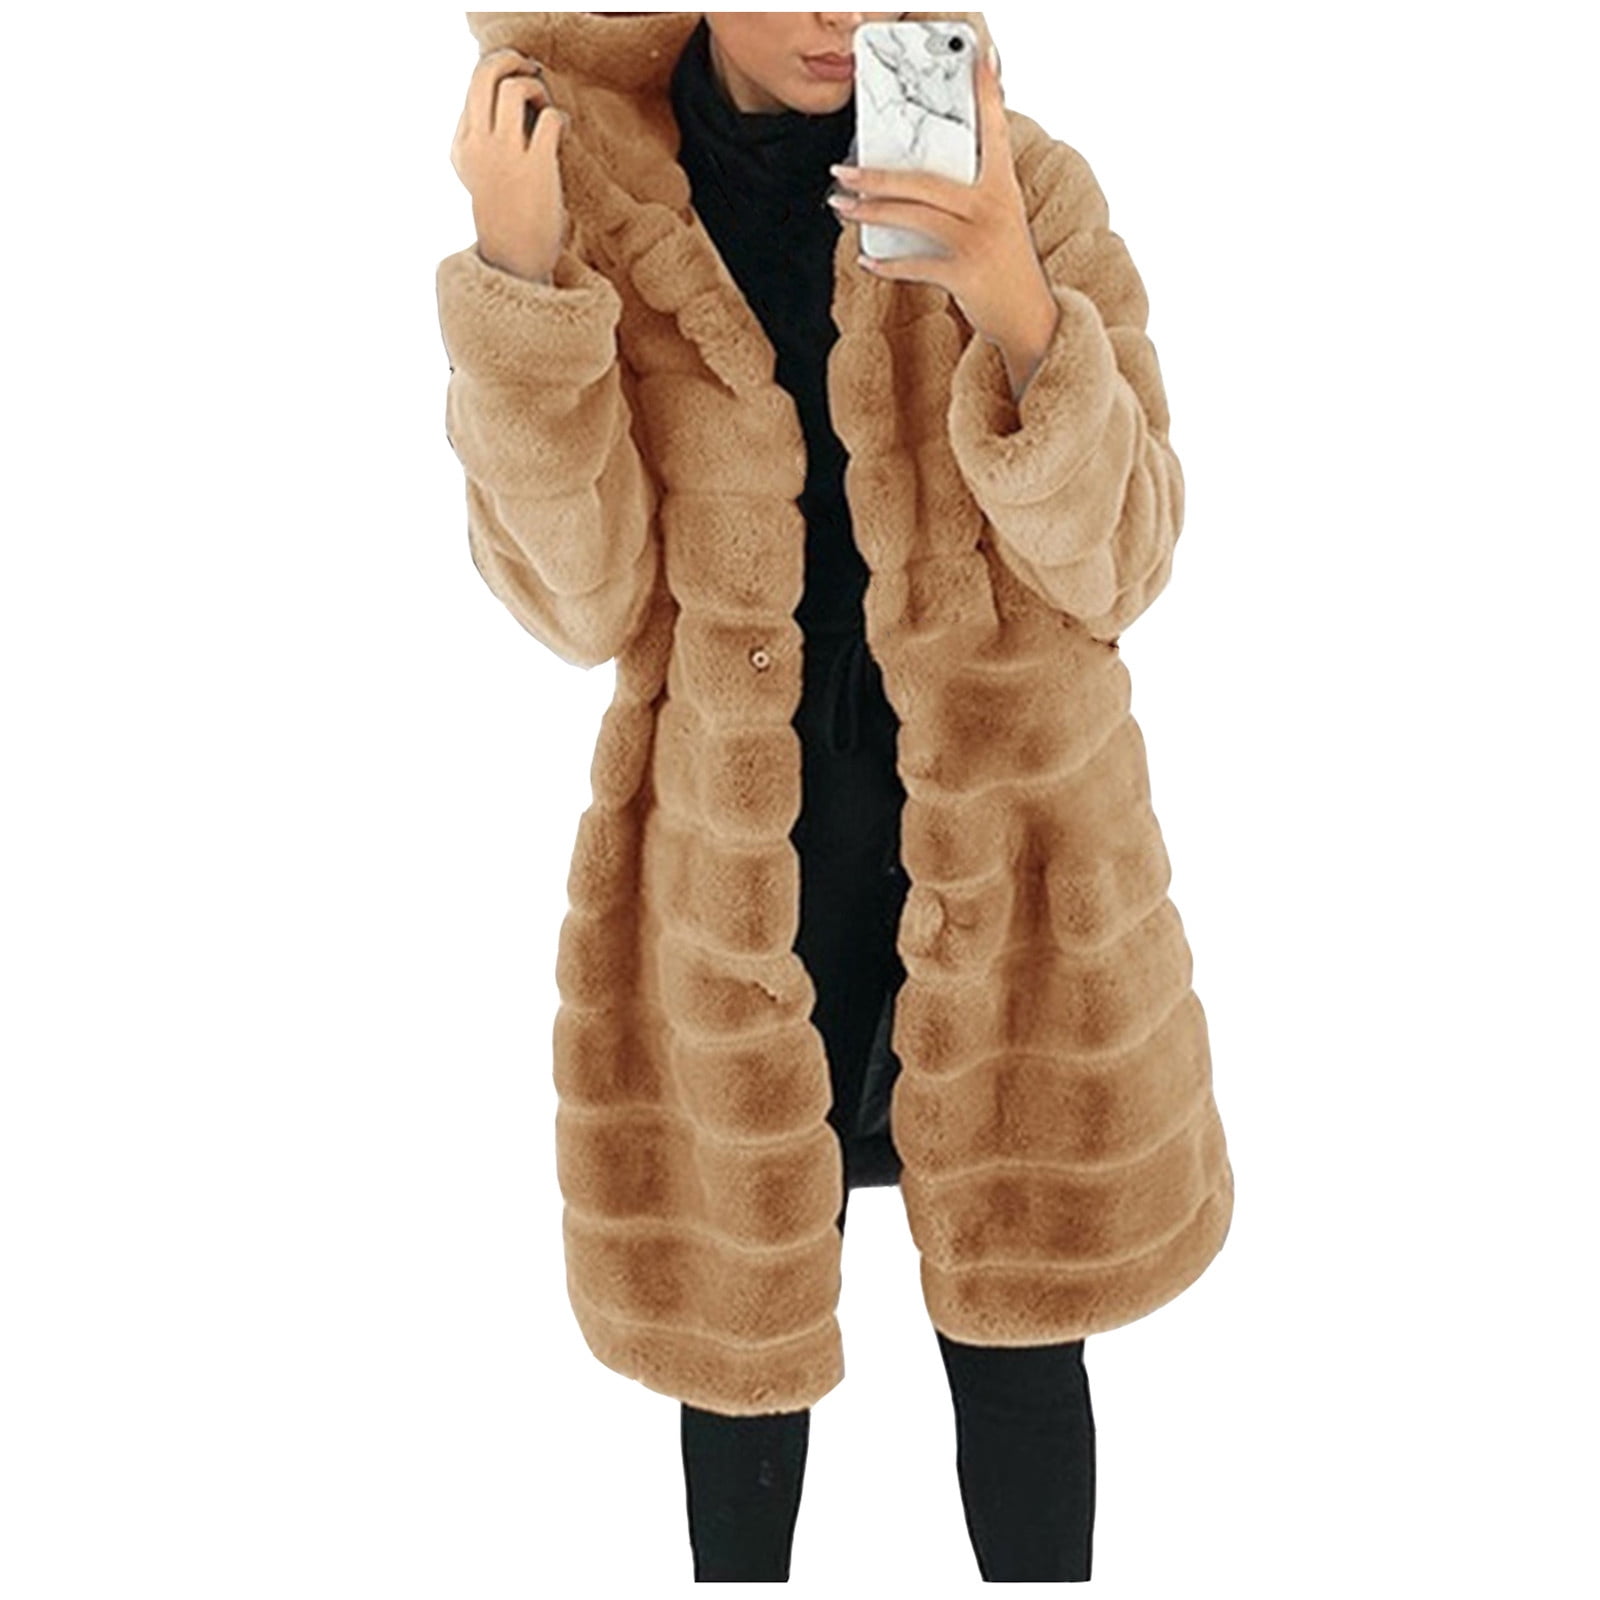  PMUYBHF Walking Coat with Faux Fur Collar Oversized Coat  Sweatshirts Lightweight Hooded Raincoat Faux Fur Lapel Coat With Pockets  Windproof Overcoat Warm Thick Coats : Clothing, Shoes & Jewelry